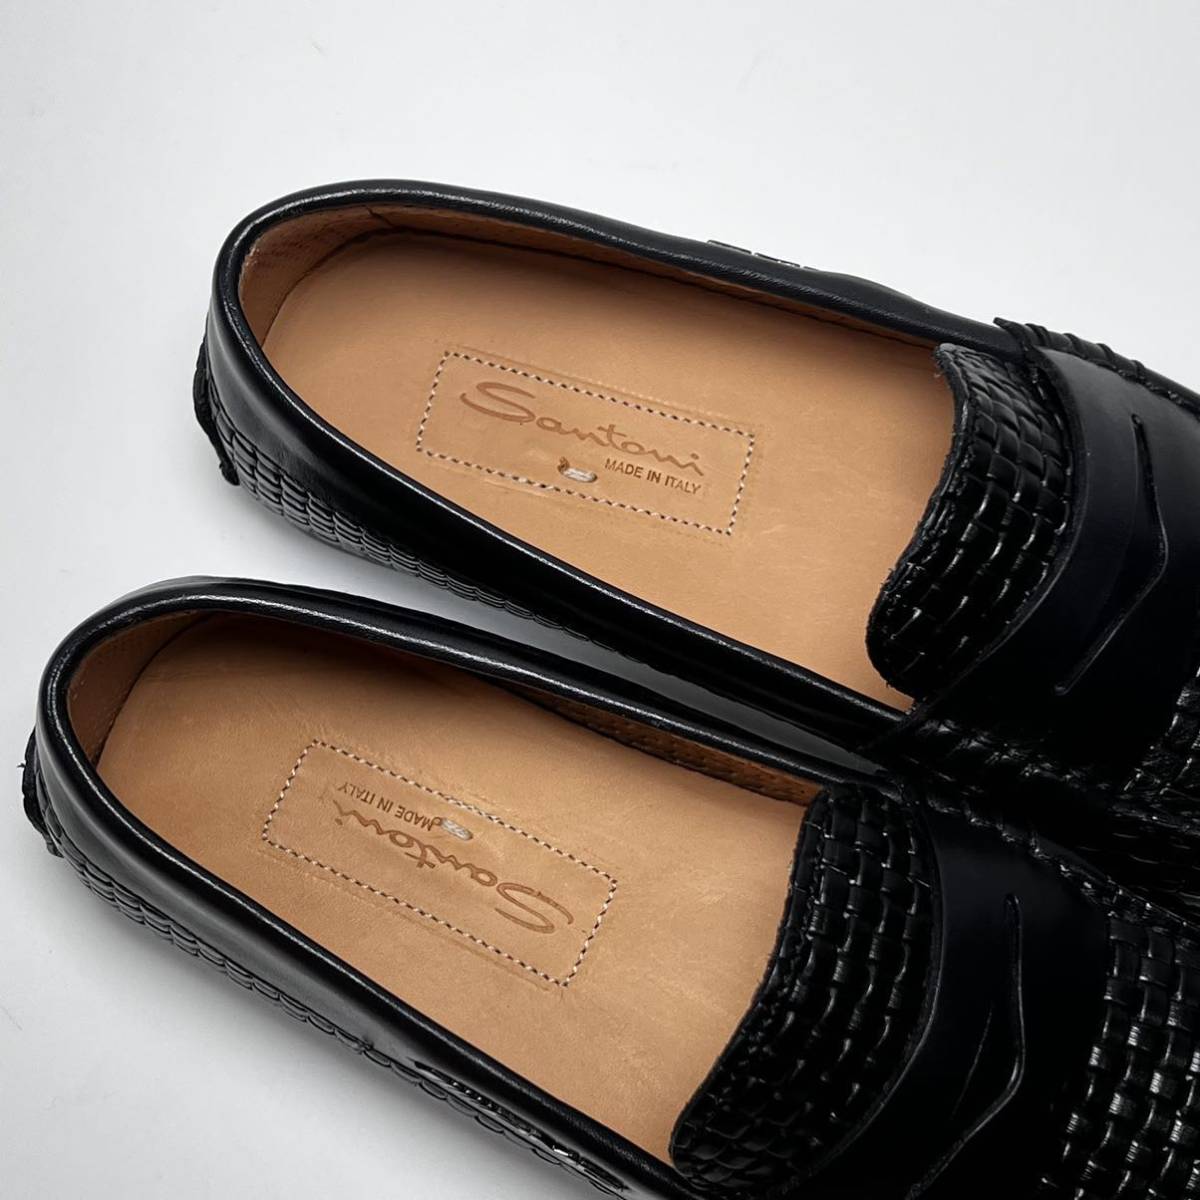  new goods UK6 sun to-nifor AMG leather Loafer 228s black 